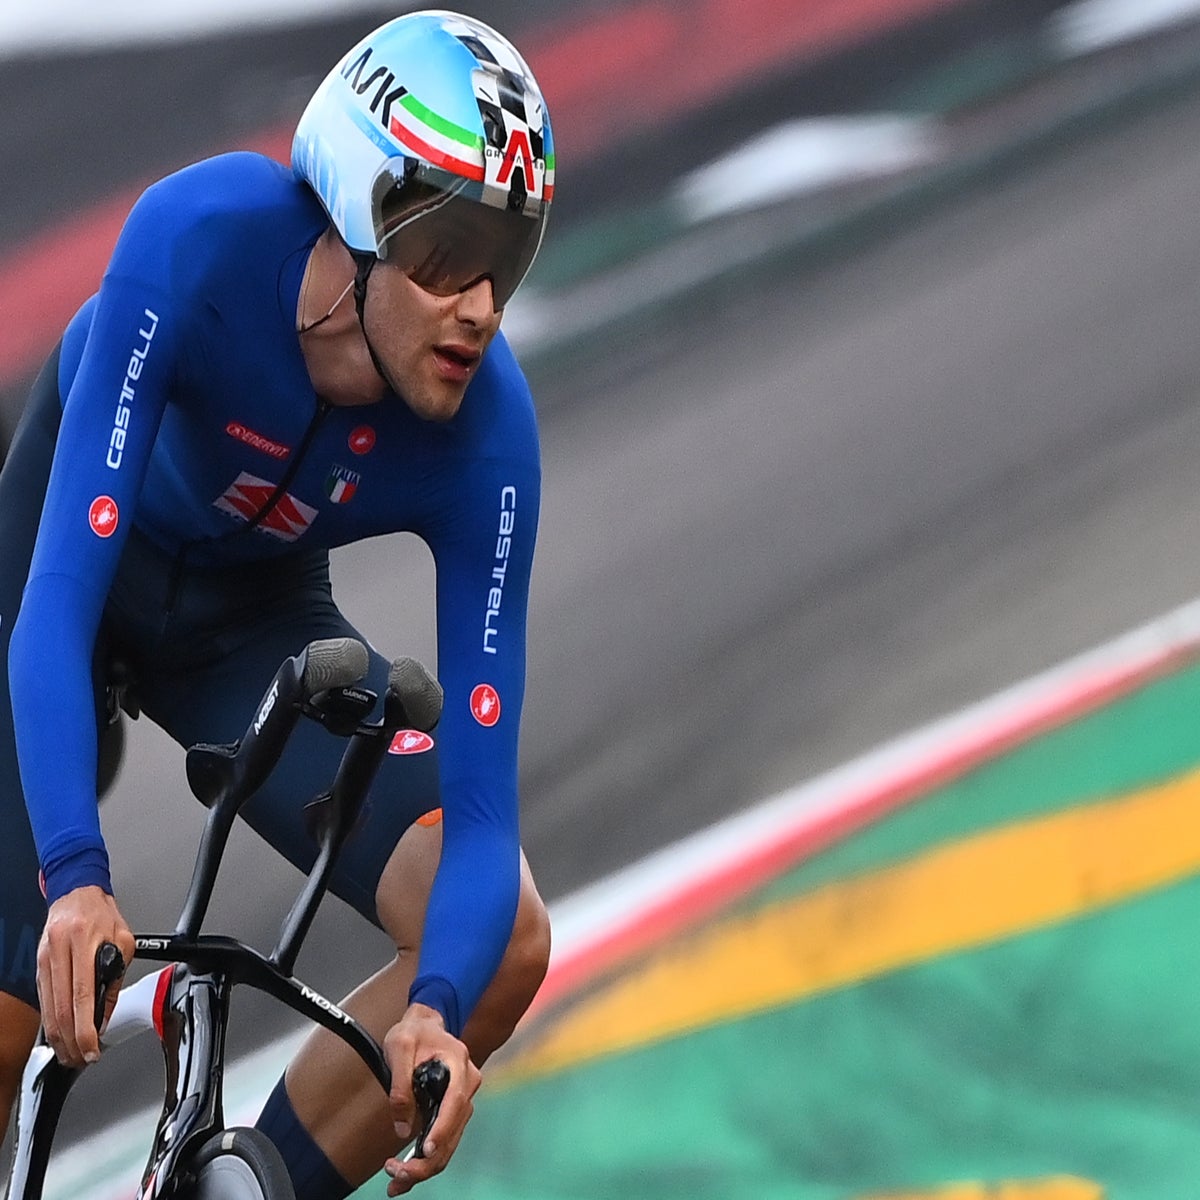 Italy's Ganna powers to cycling world one-hour record - Oman Observer